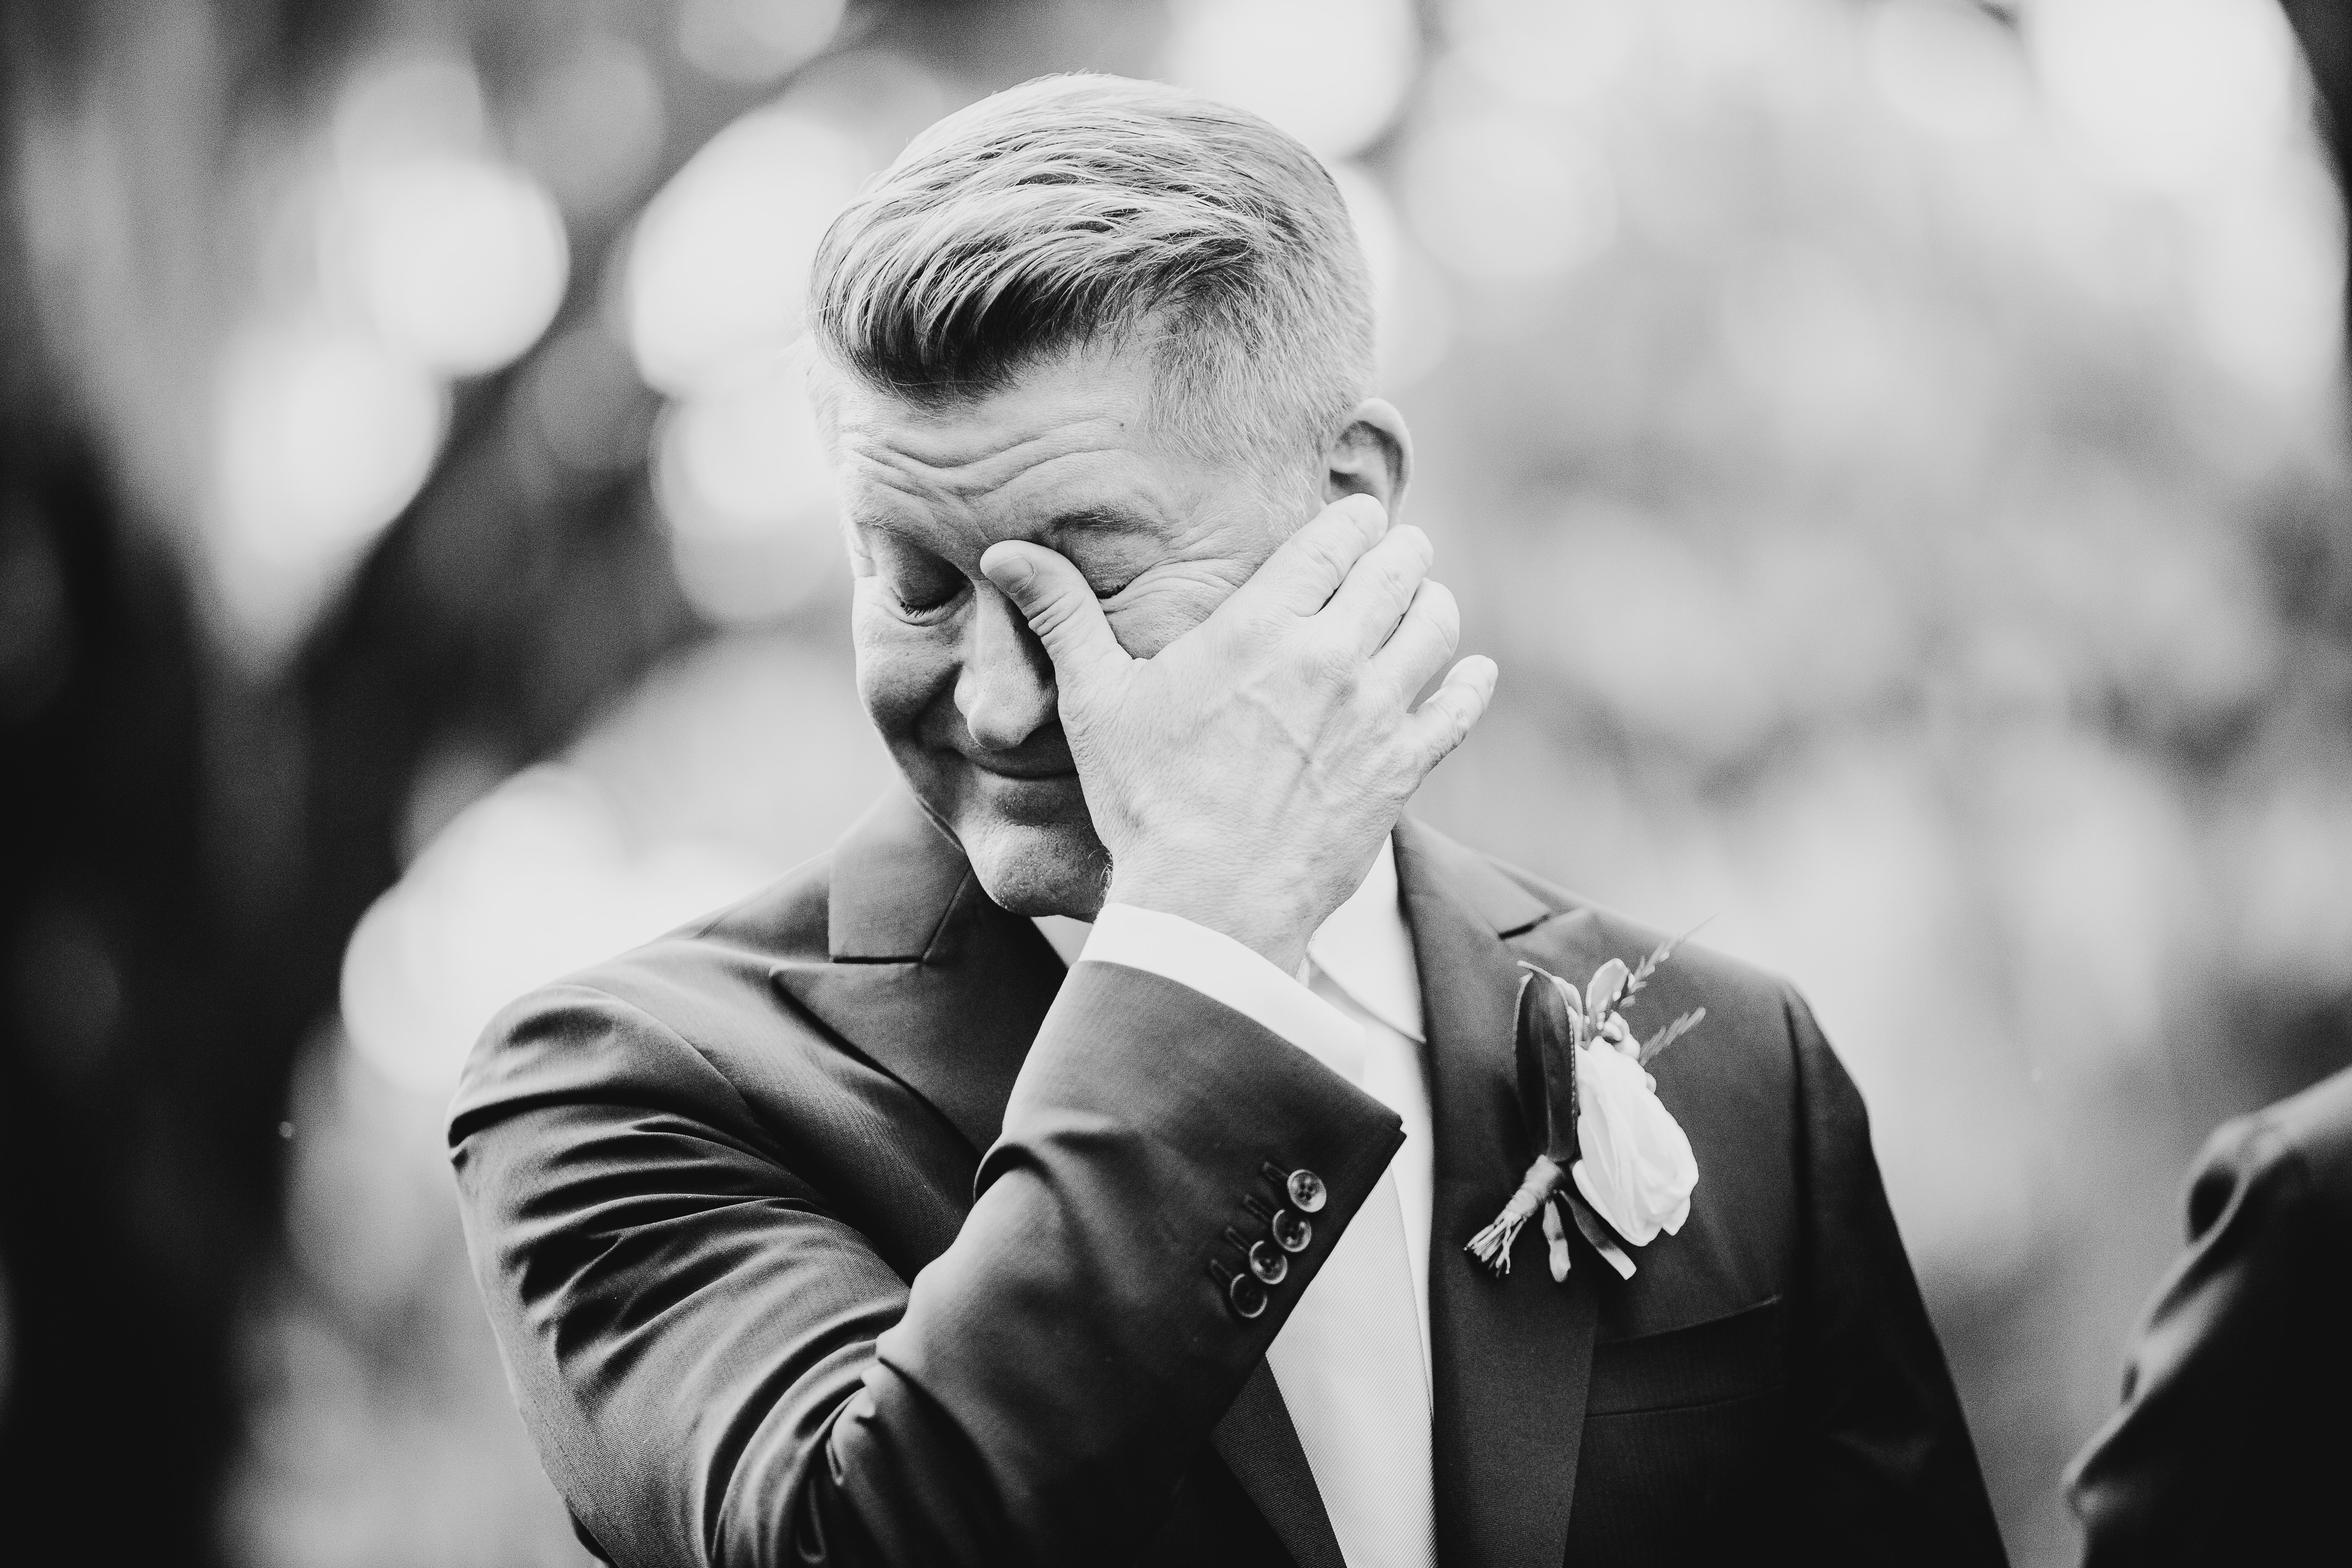 Groom wiping a tear away from his eye as he sees his bride walk down the aisle